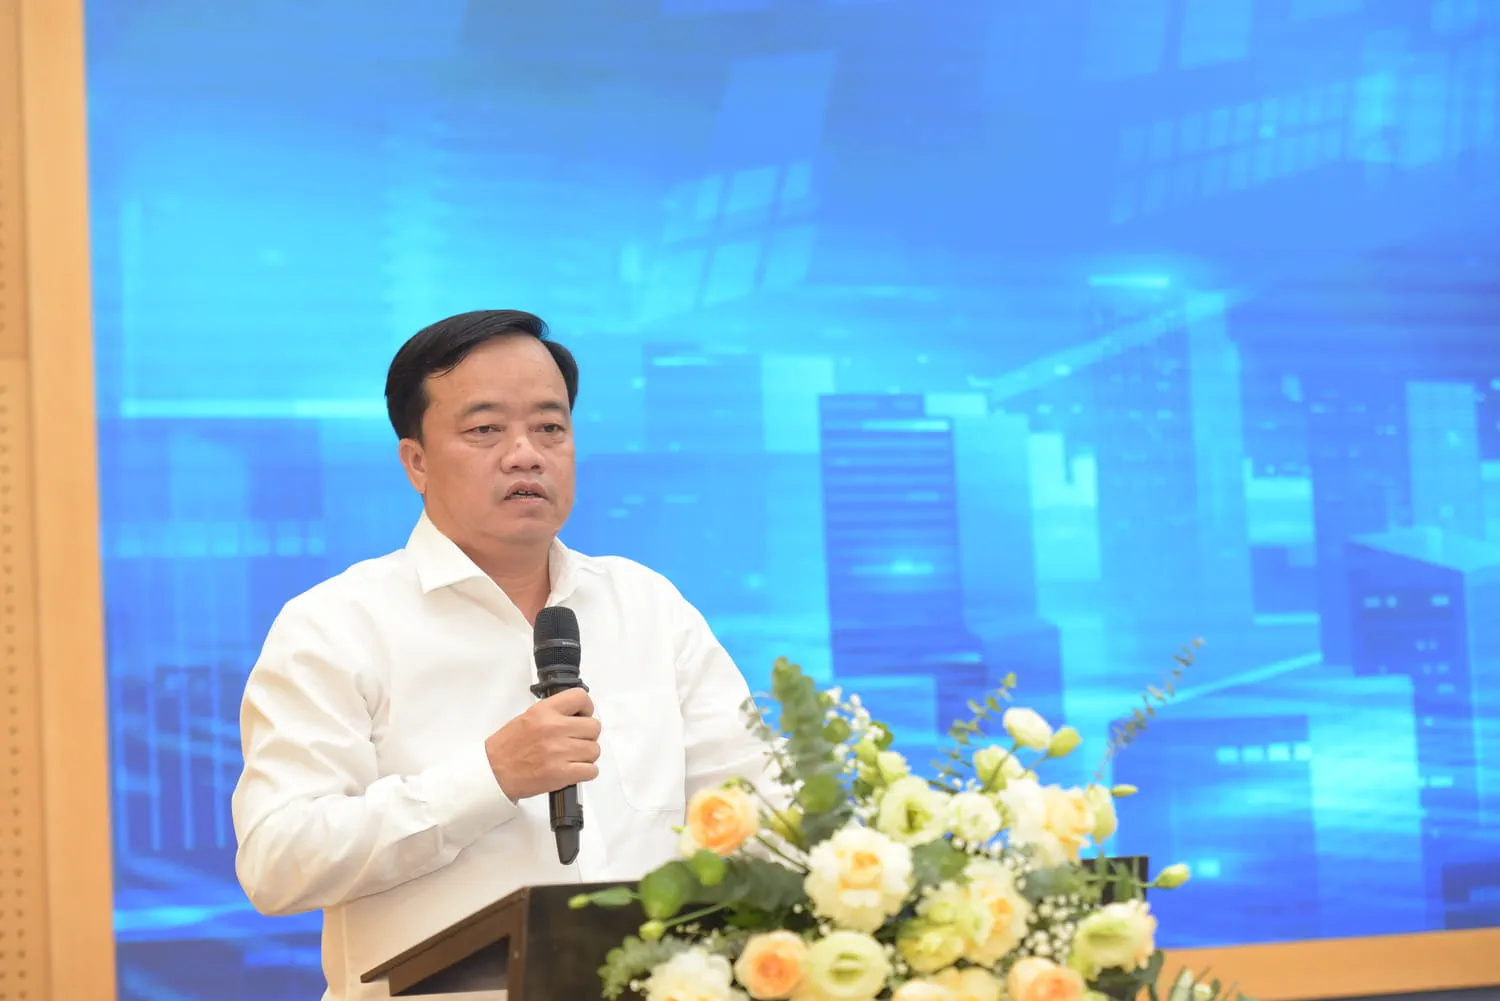 Mr. Huynh Quoc Viet, Alternate Member of the Central Party Executive Committee, Deputy Secretary of the Provincial Party Committee, and Chairman of the People's Committee of Ca Mau Province, made a statement at the event.